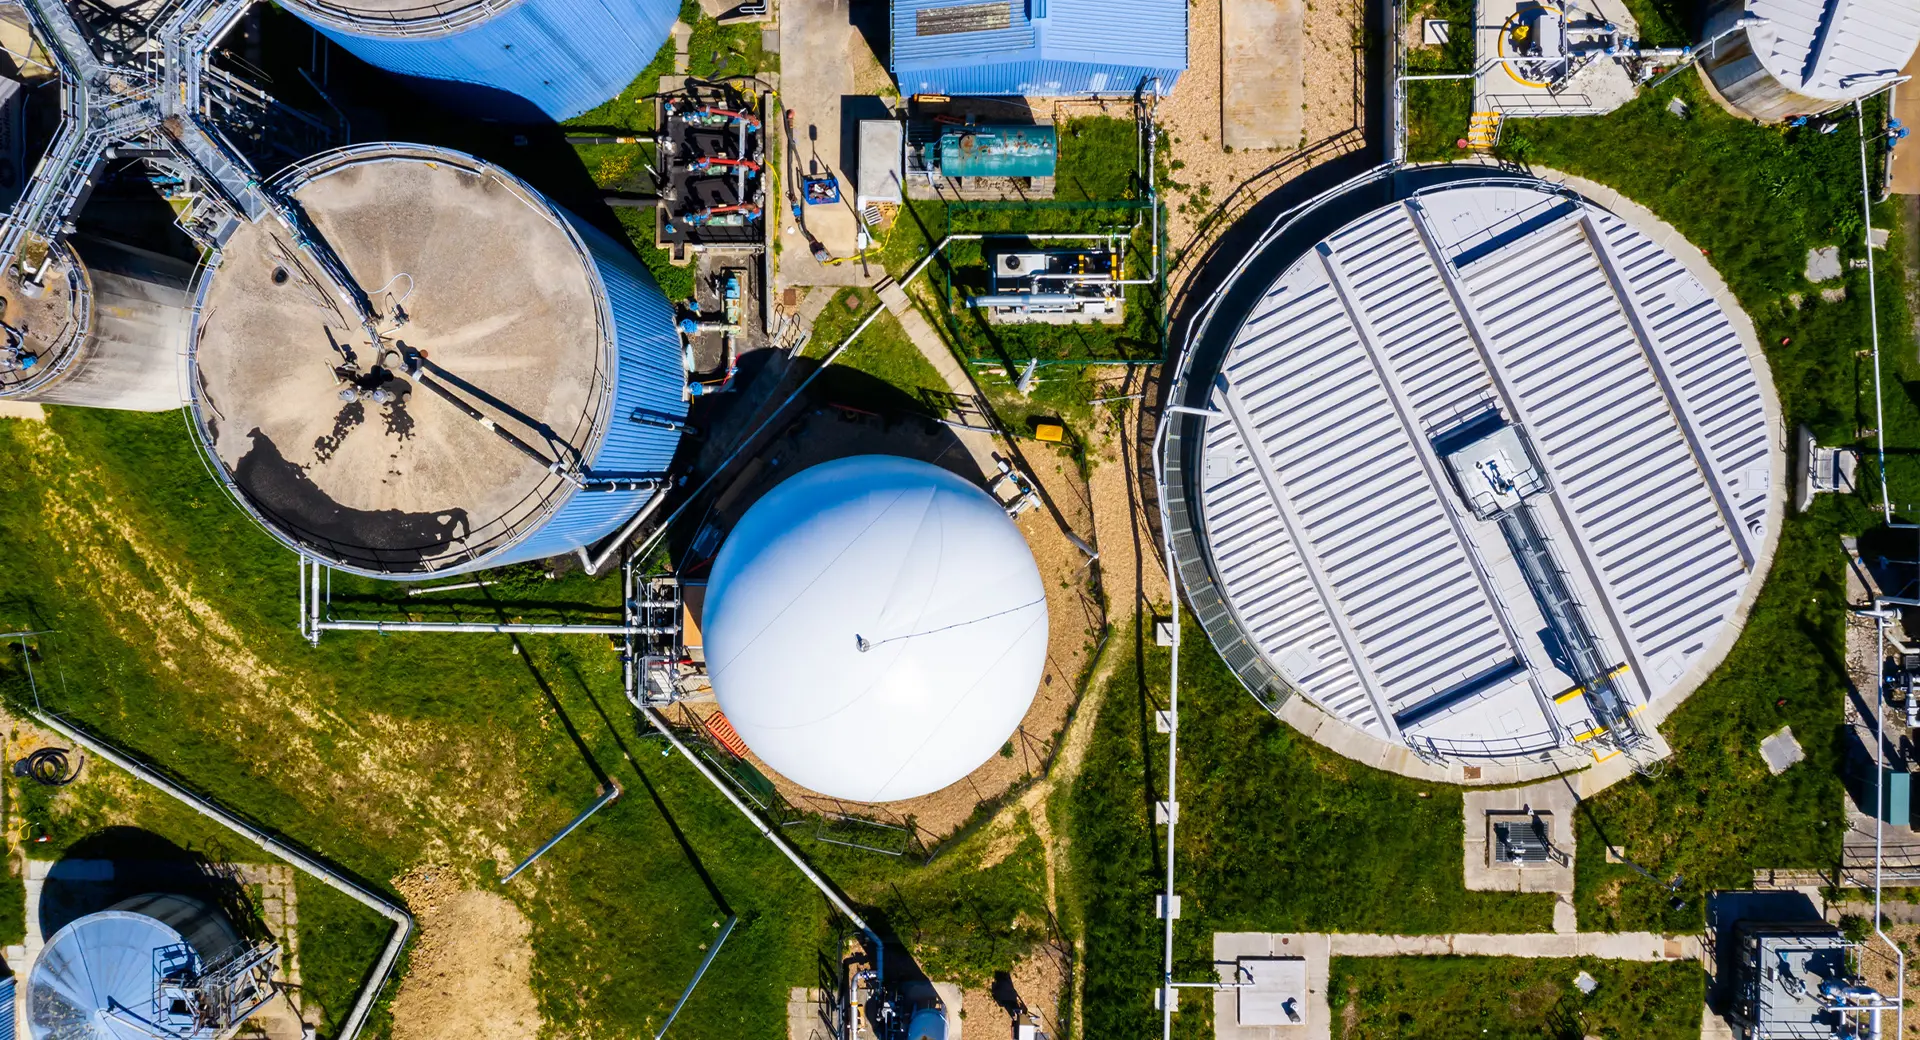 An aerial view of Goddards Green Wastewater Treatment Works